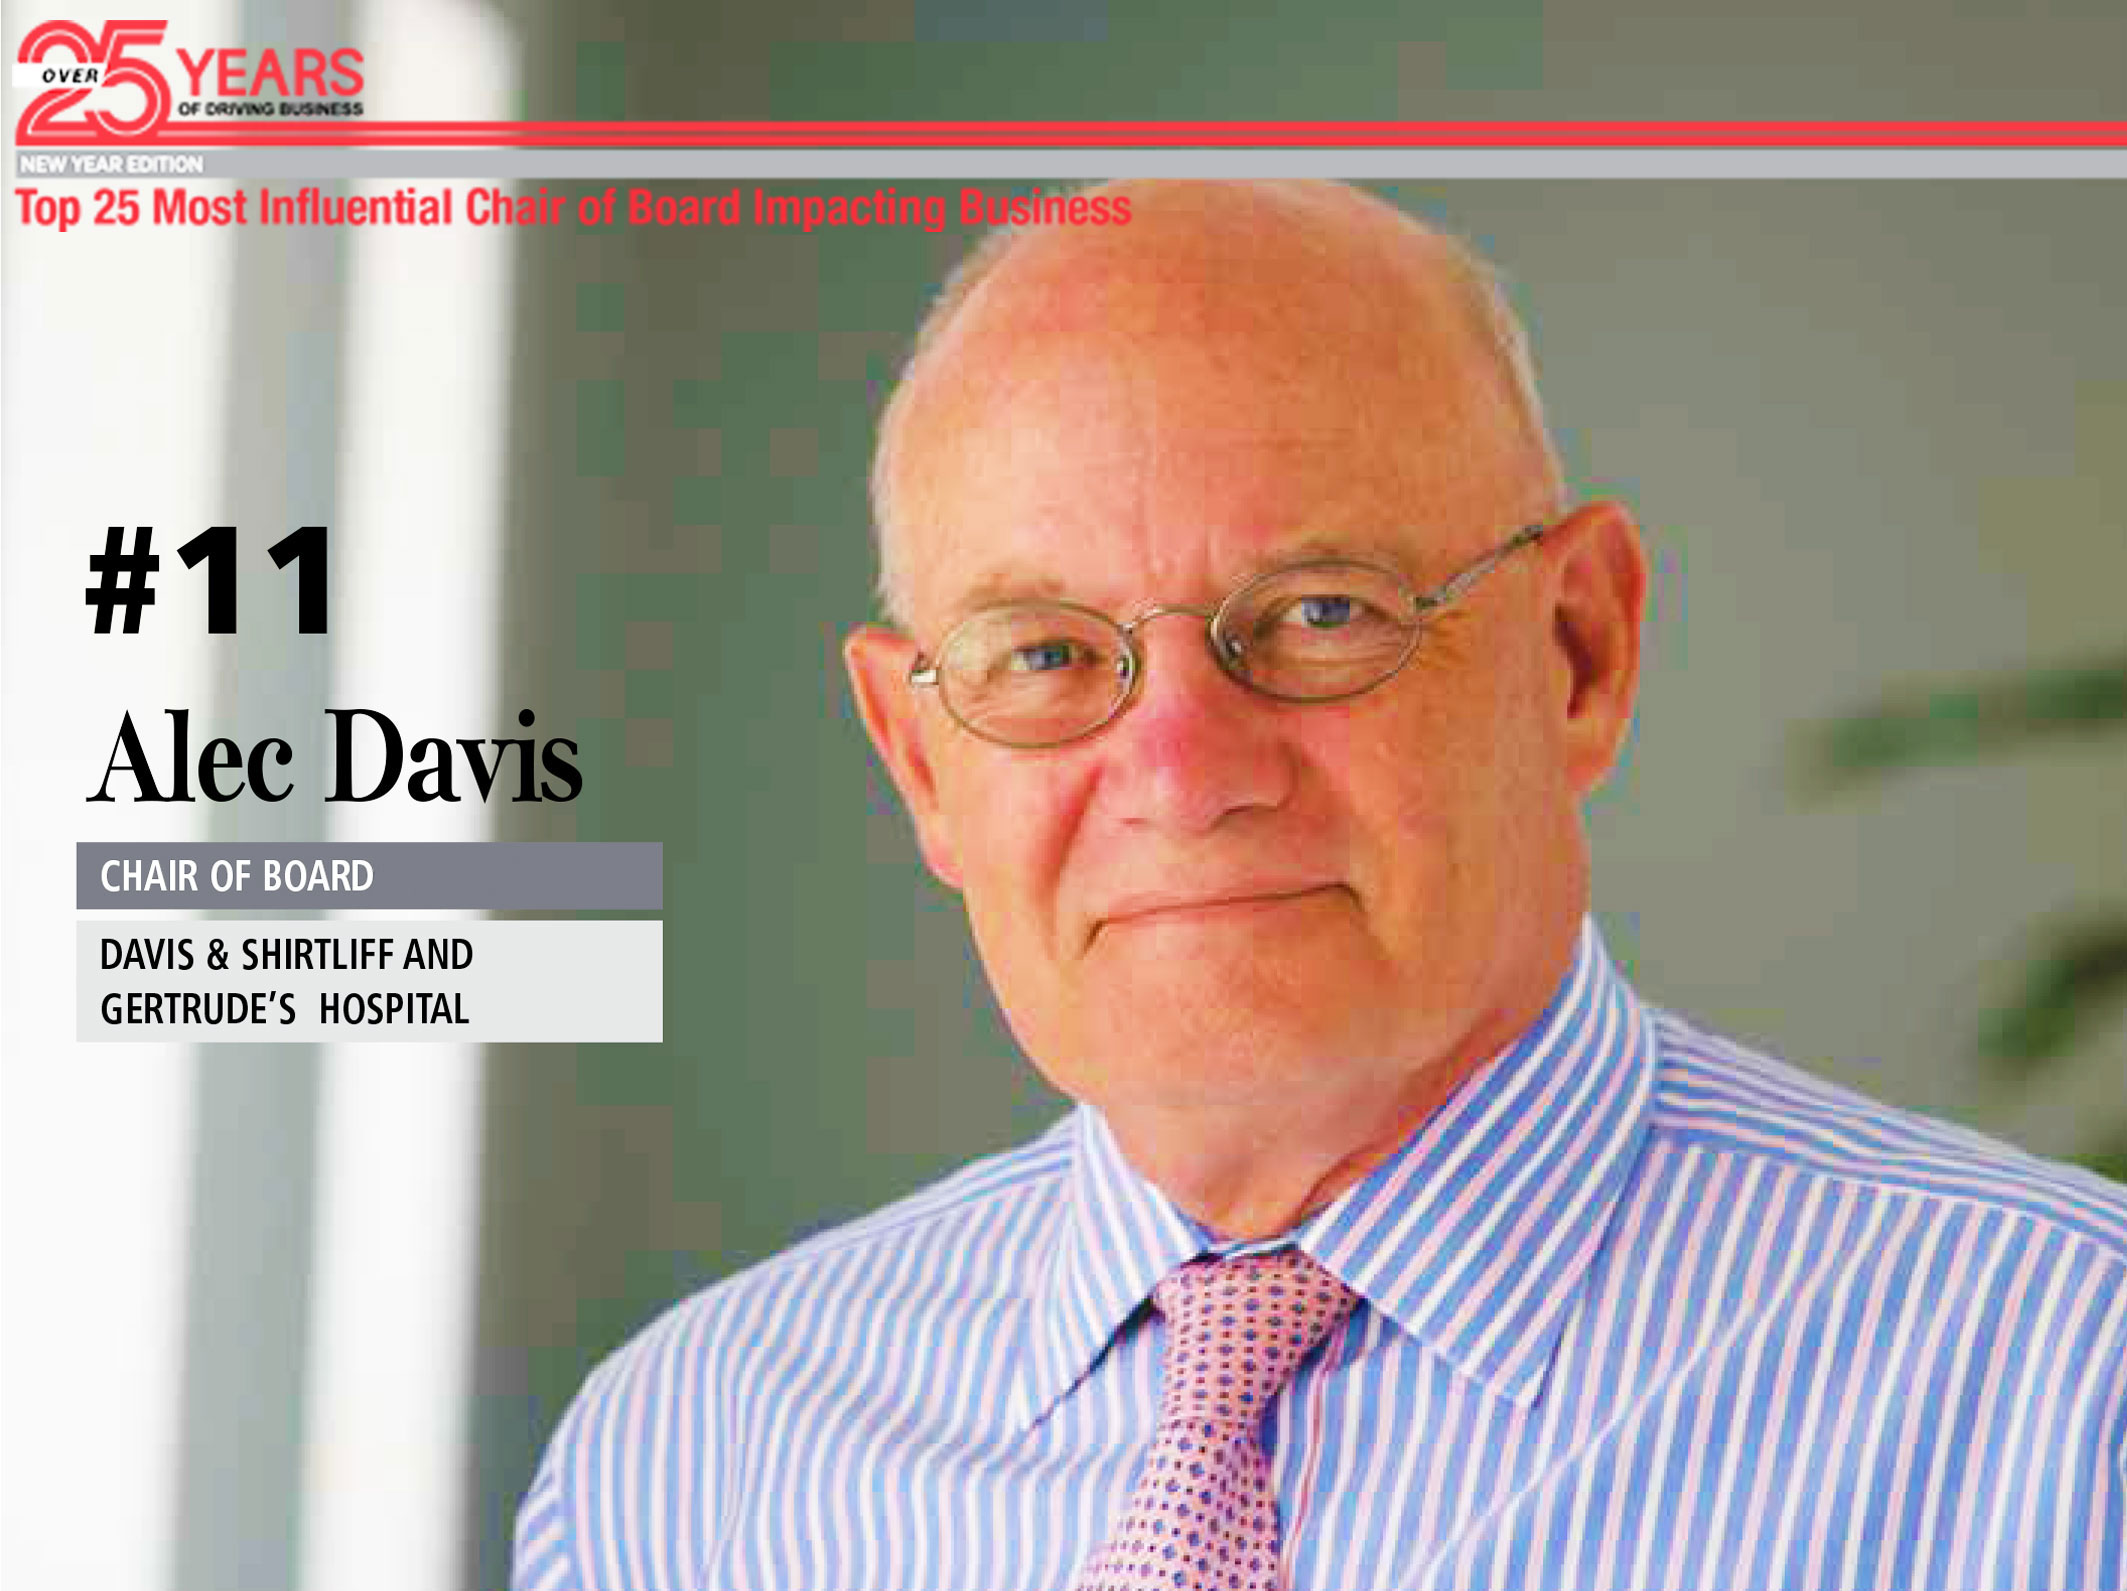 Davis & Shirtliff Group Chairman Alec Davis, featured on top 25 Chairman with over 25years as a CEO of Davis & Shirtliff